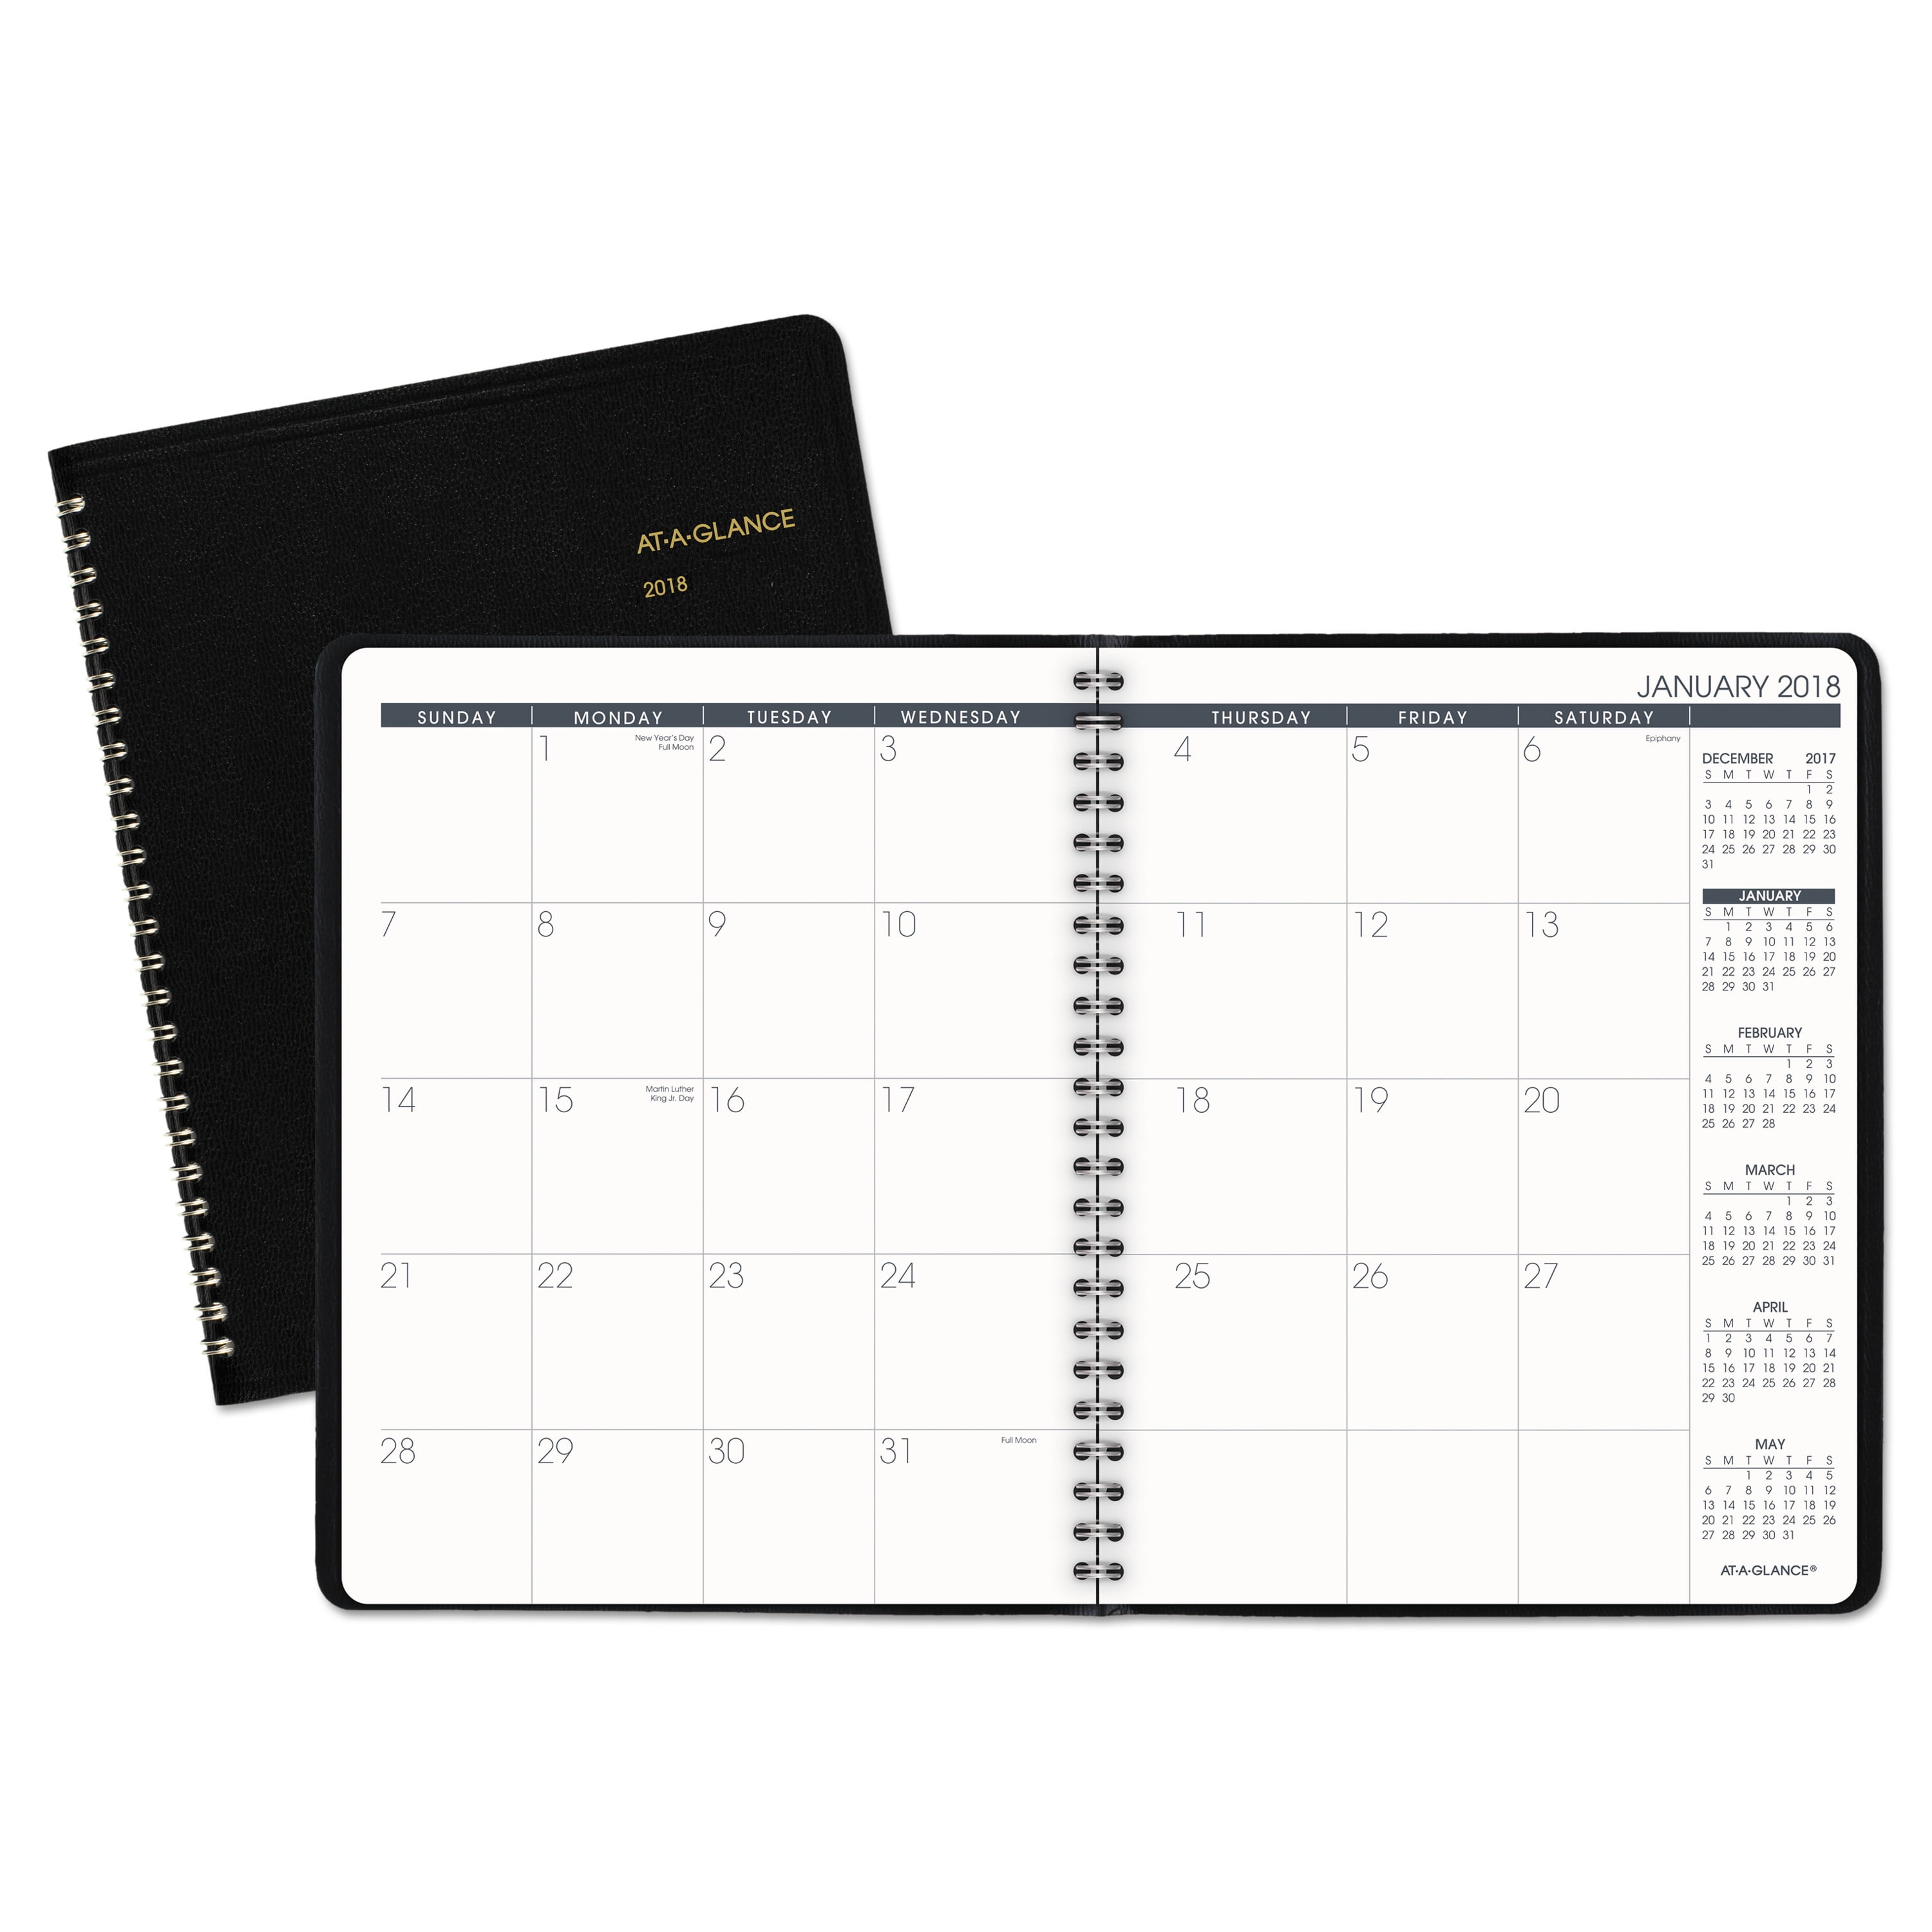 2018 monthly planner at a glance 5x8 inch 70-120